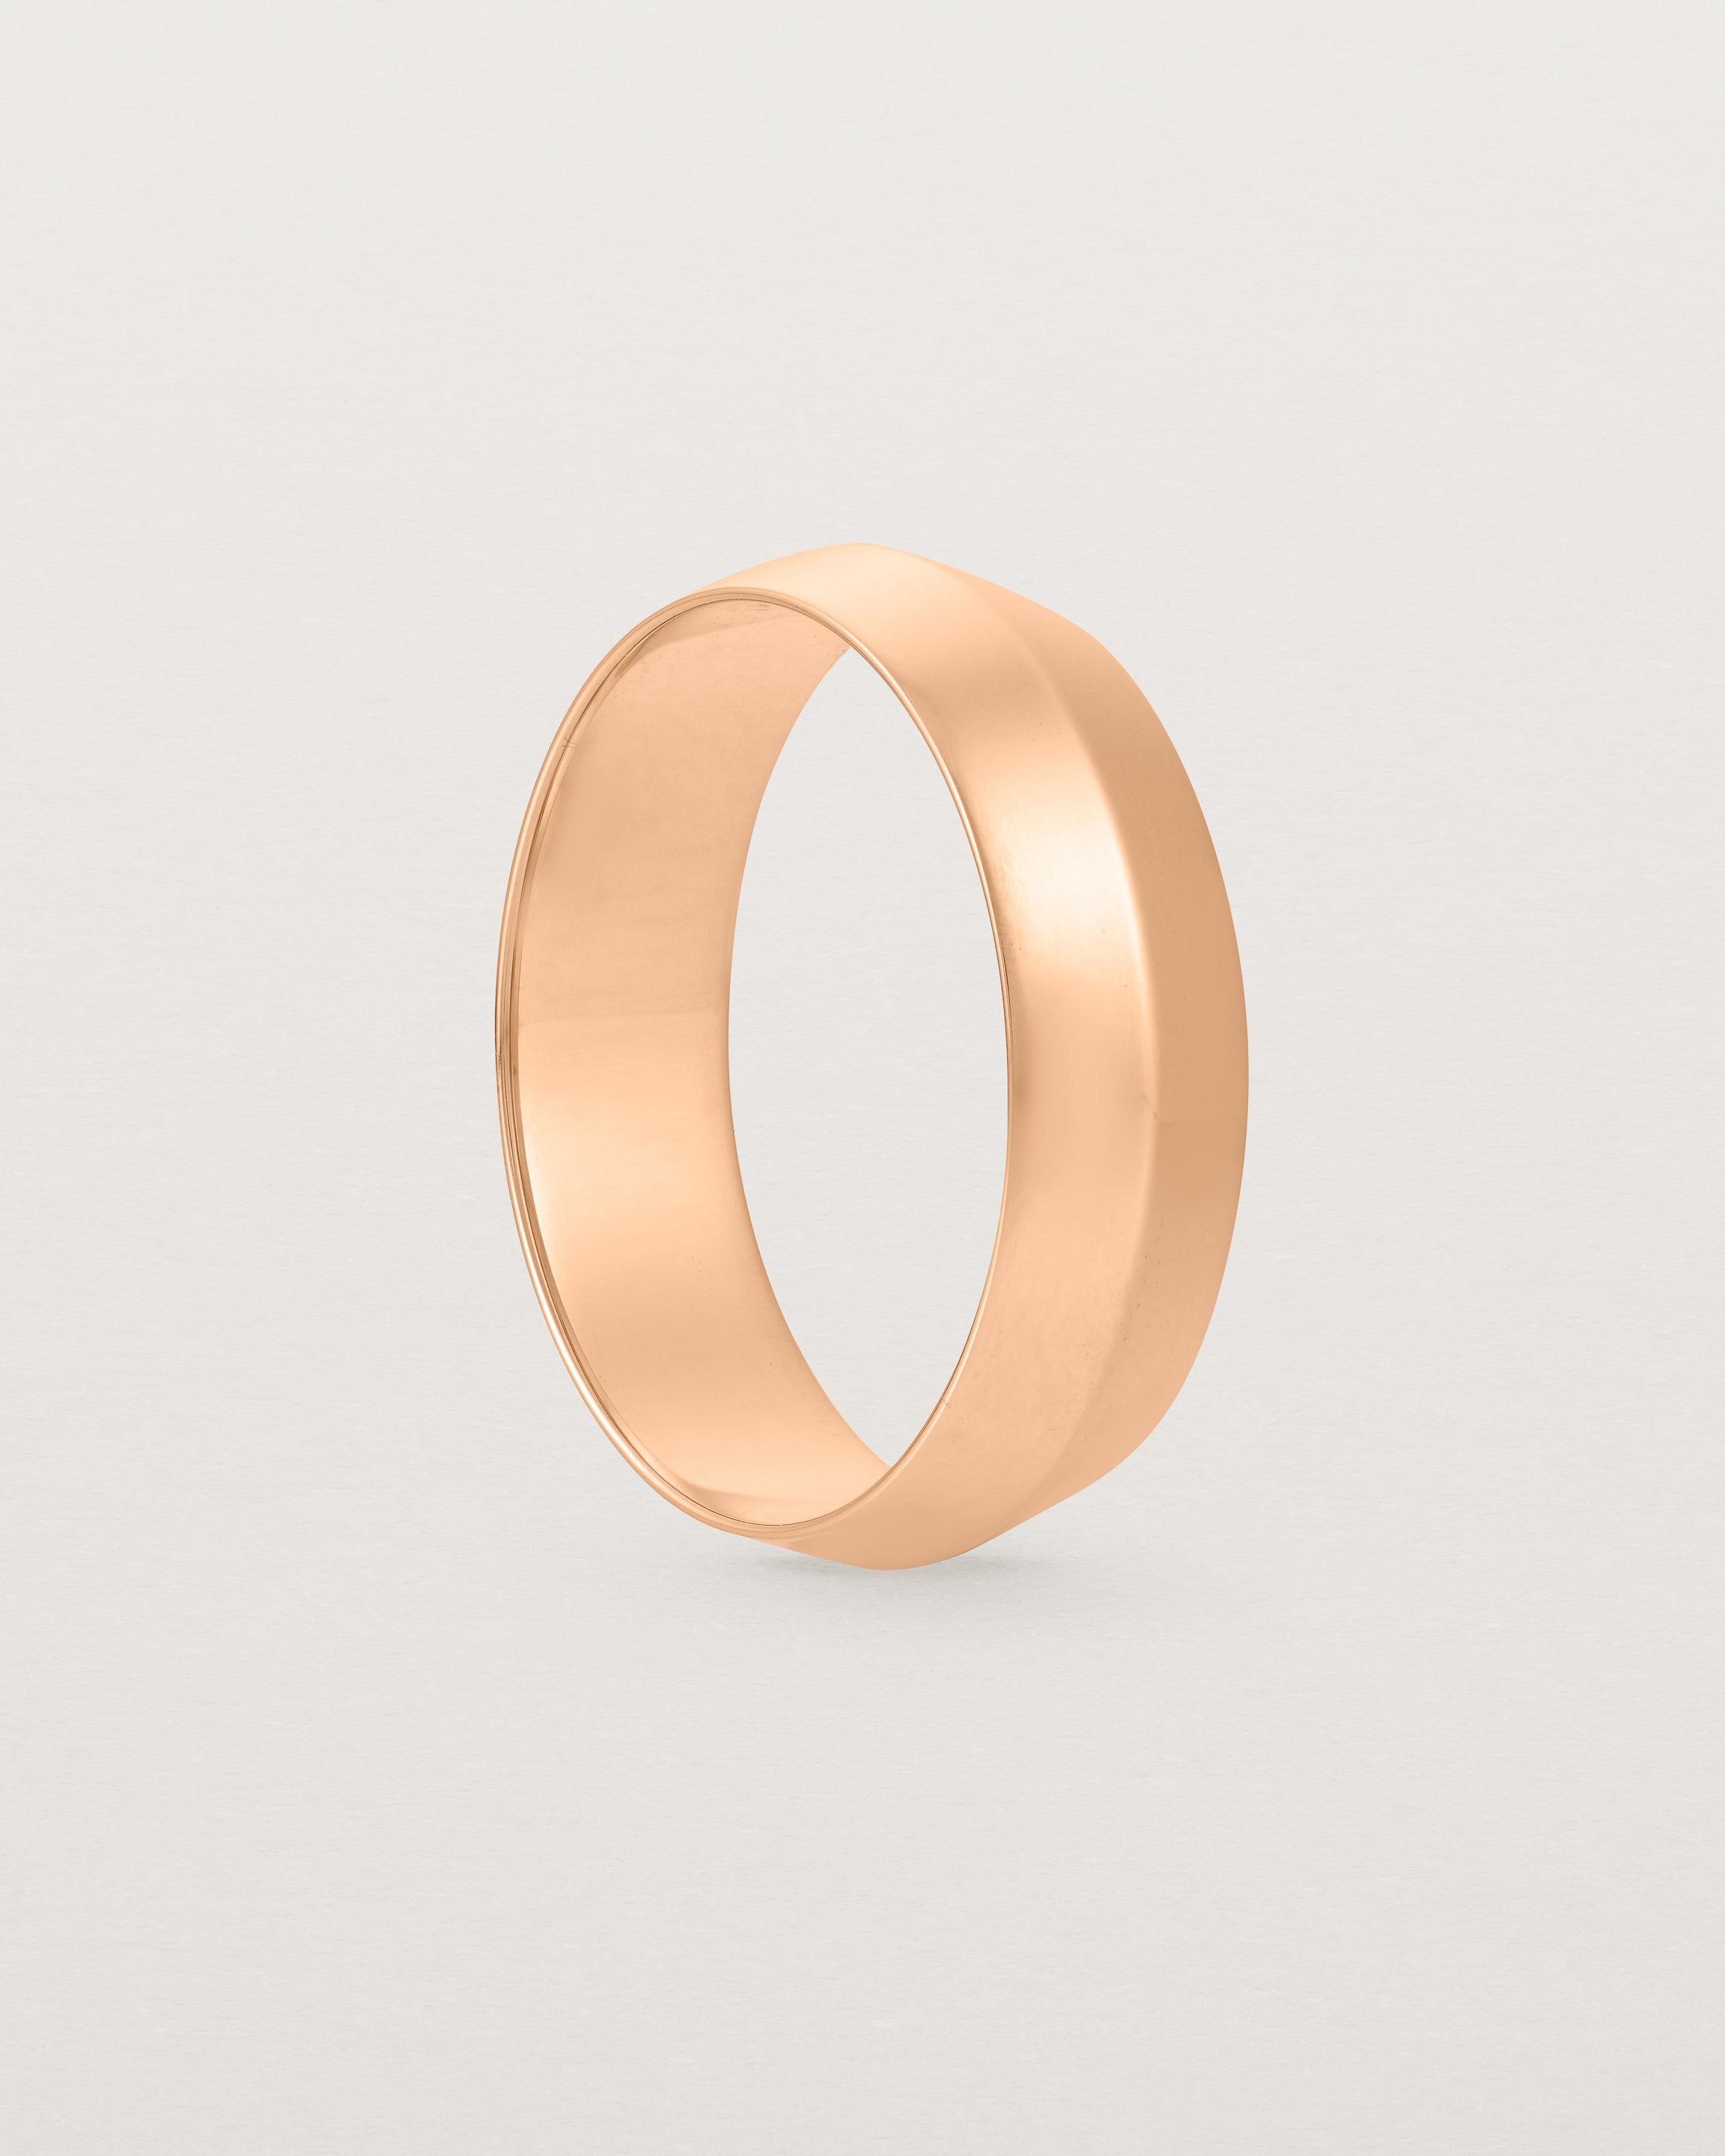 Standing view of the Knife Edge Wedding Ring | 6mm | Rose Gold.